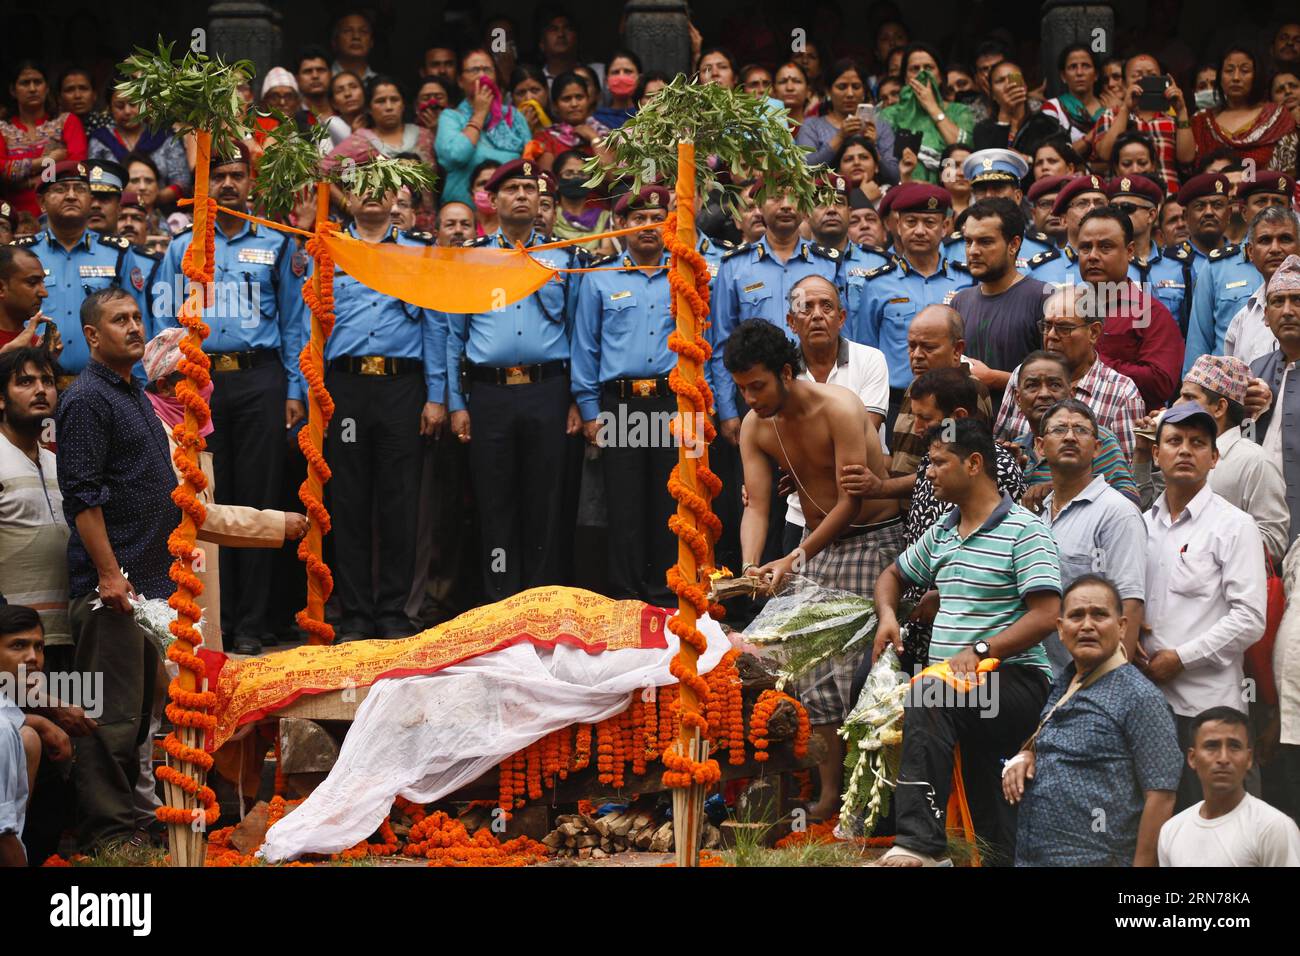 KATHMANDU, Aug. 25, 2015 -- Son of the Senior Superintendent of Police (SSP) Laxman Neupane killed at a clash with protesters gives last tribute to his father at Pashupatinath Temple in Kathmandu, Nepal, Aug. 25, 2015. The death toll in the violent clash that erupted over the proposed federalism in the far western Nepal has reached to 20, local media reported. ) NEPAL-KATHMANDU-CLASH-POLICE-LAST TRIBUTE PratapxThapa PUBLICATIONxNOTxINxCHN   Kathmandu Aug 25 2015 Sun of The Senior Superintendent of Police SSP LAXMAN Neupane KILLED AT a Clash With protesters Gives Load Tribute to His Father AT P Stock Photo